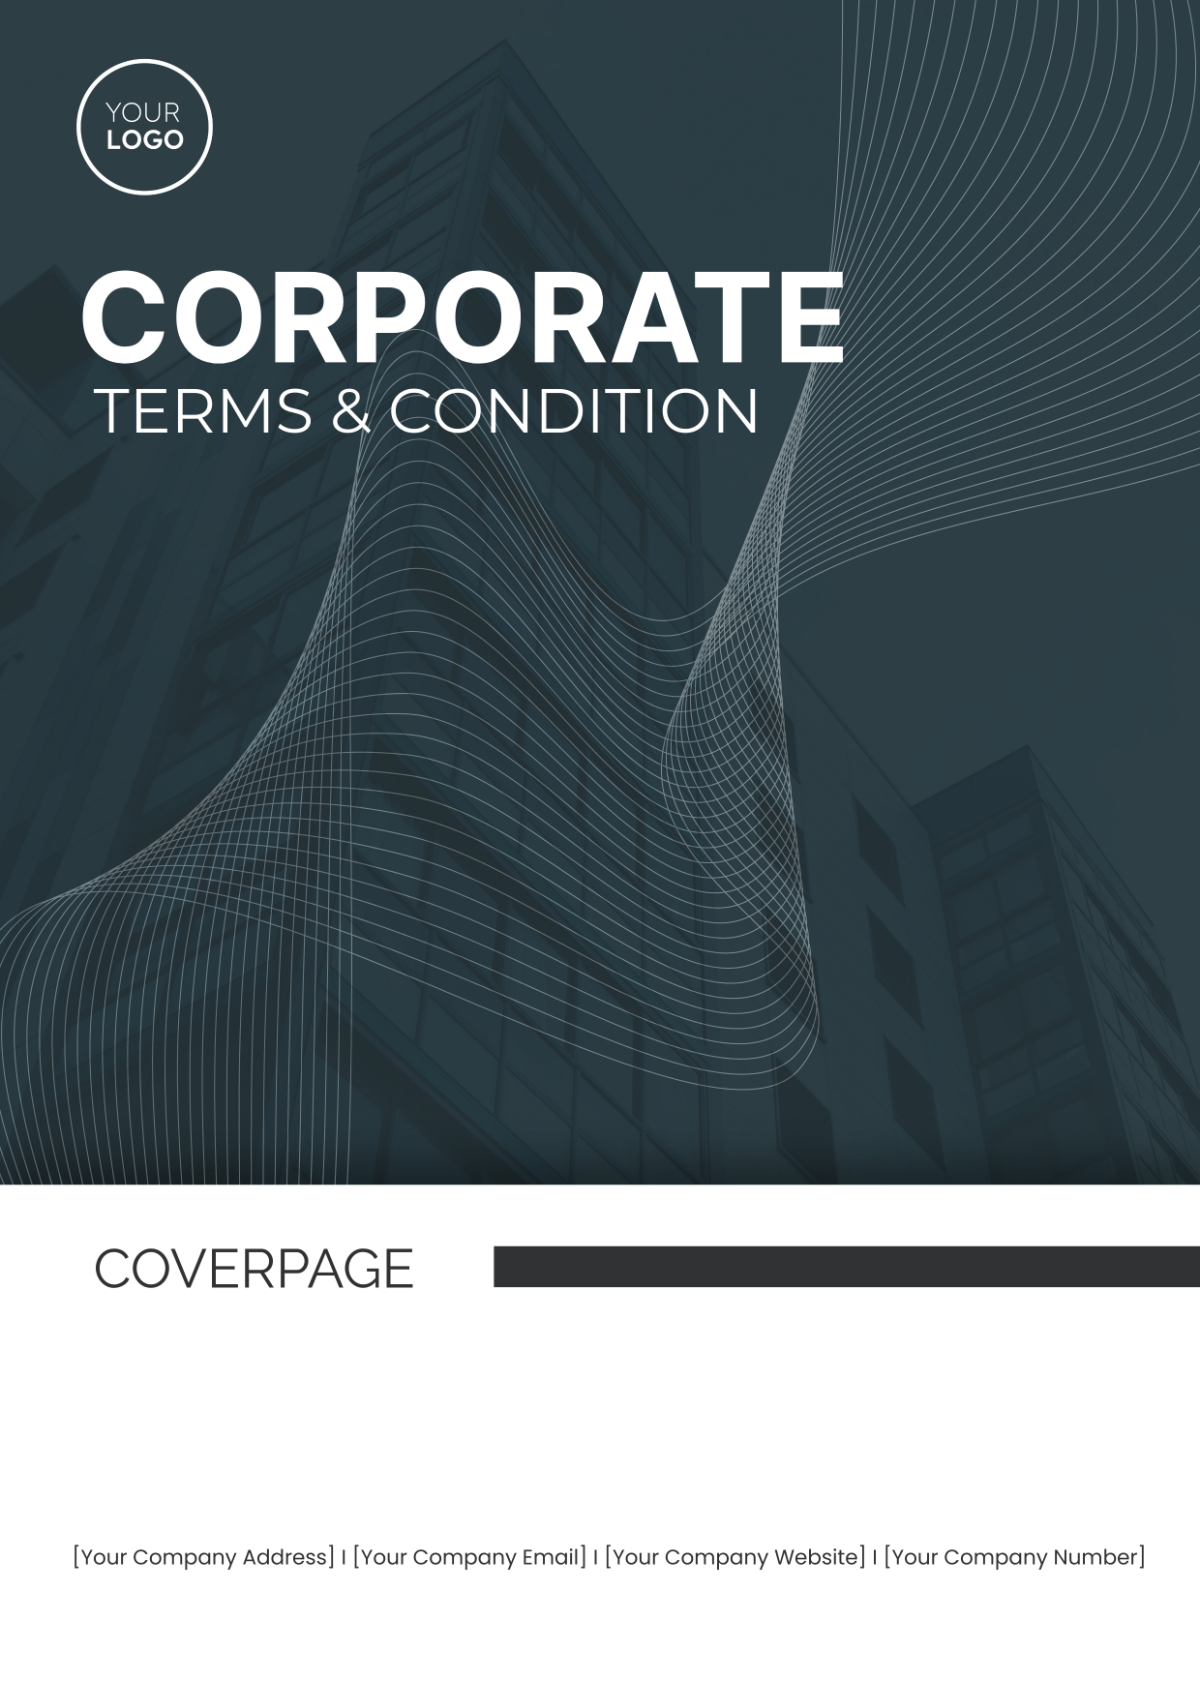 Corporate Terms and Conditions Cover Page